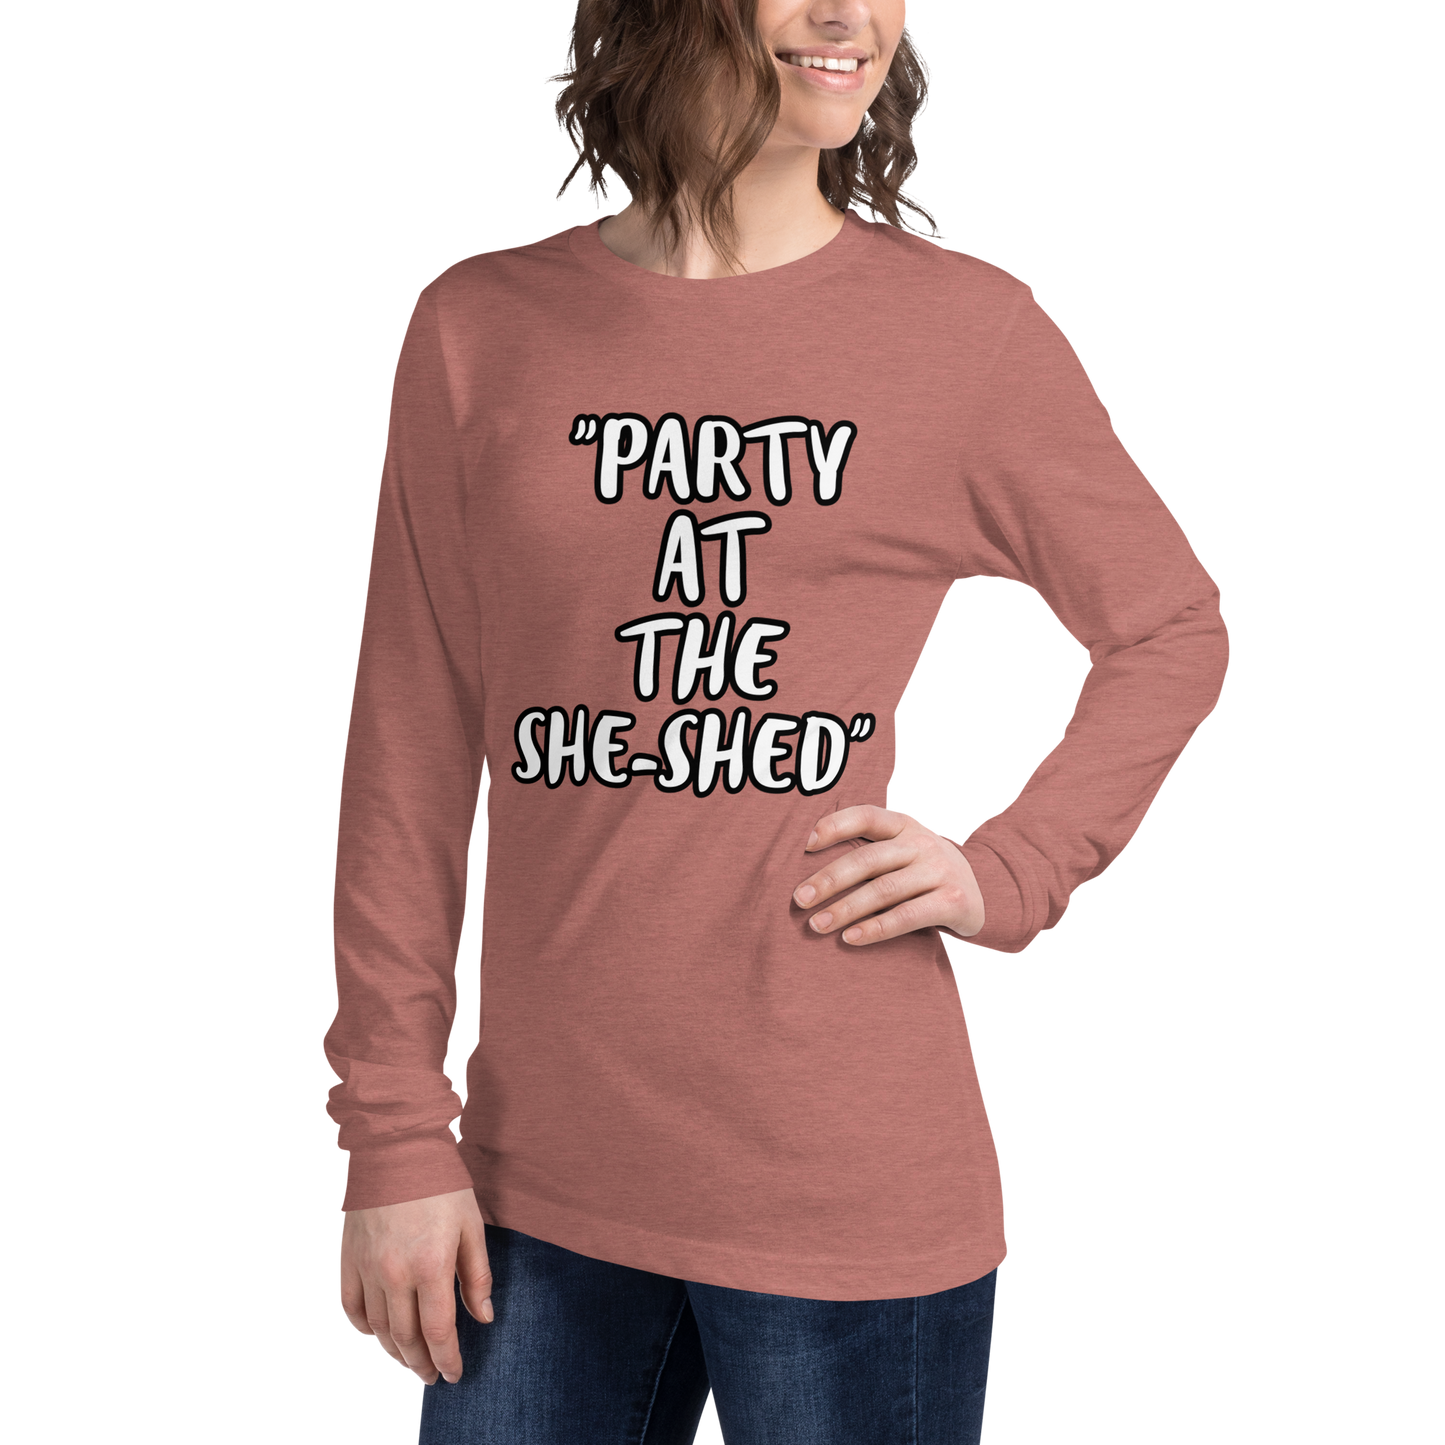 Party She-Shed Long Sleeve Shirt